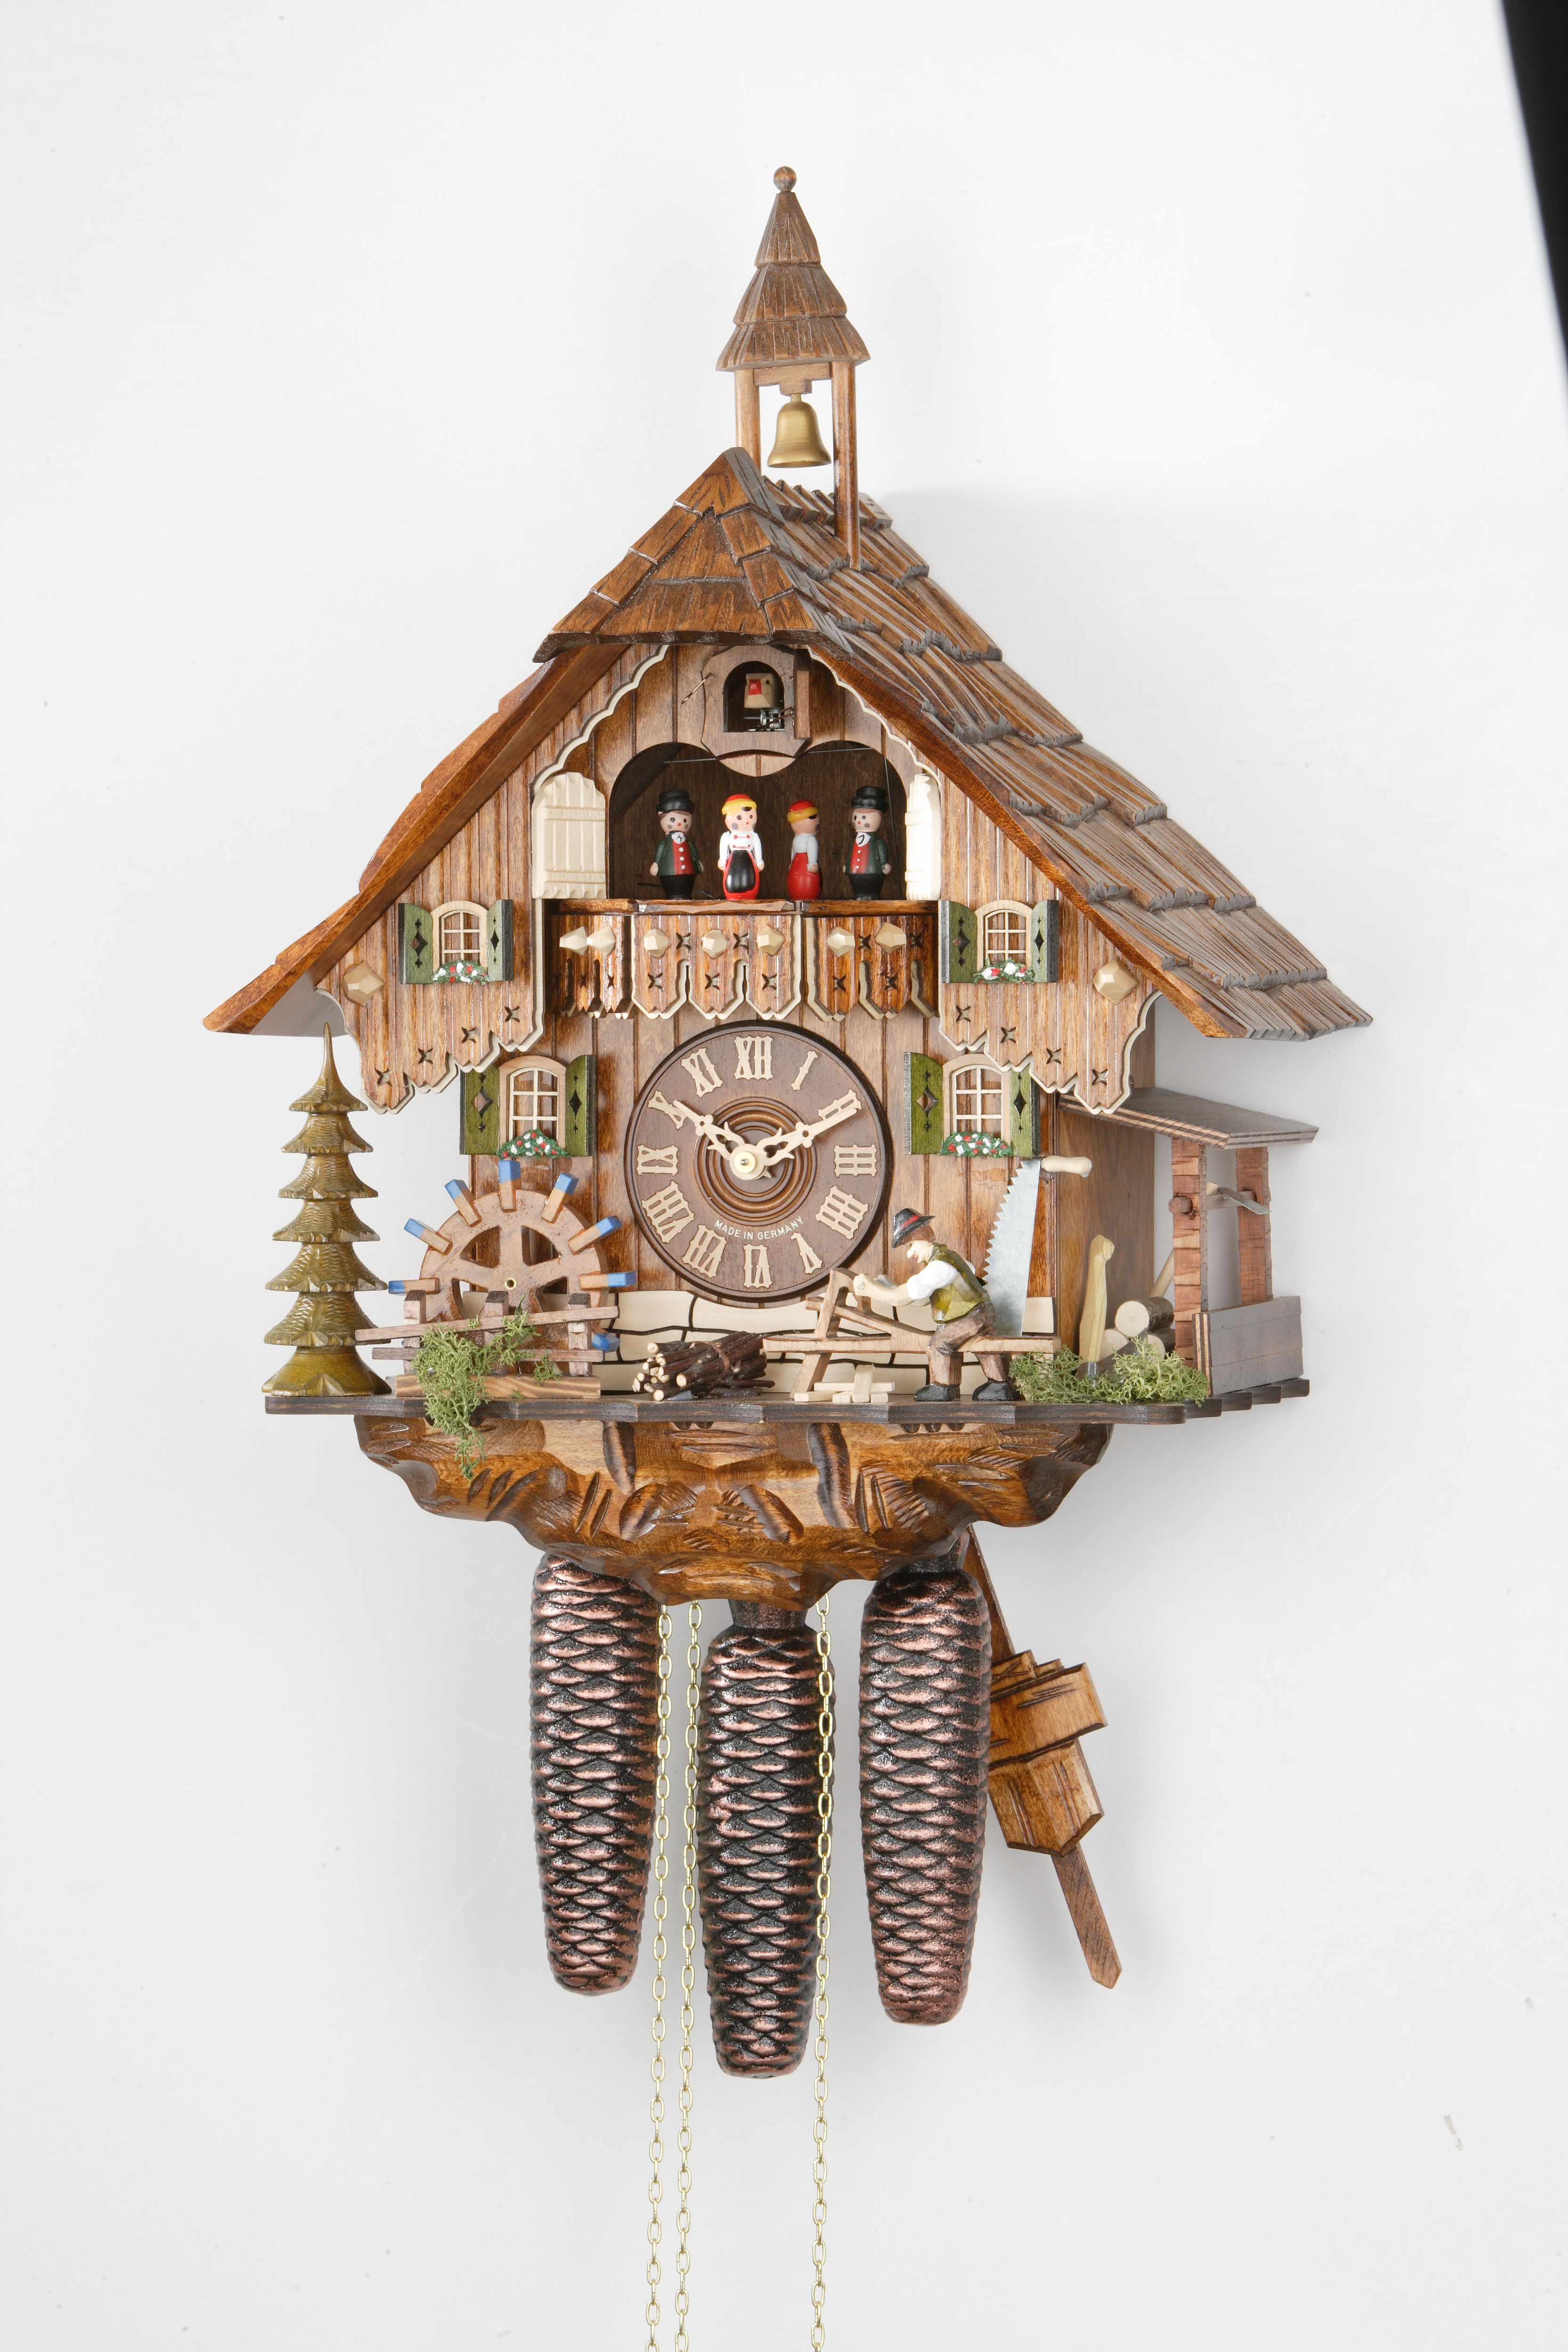 Product Of The Week A Unique Modern Cuckoo Clock